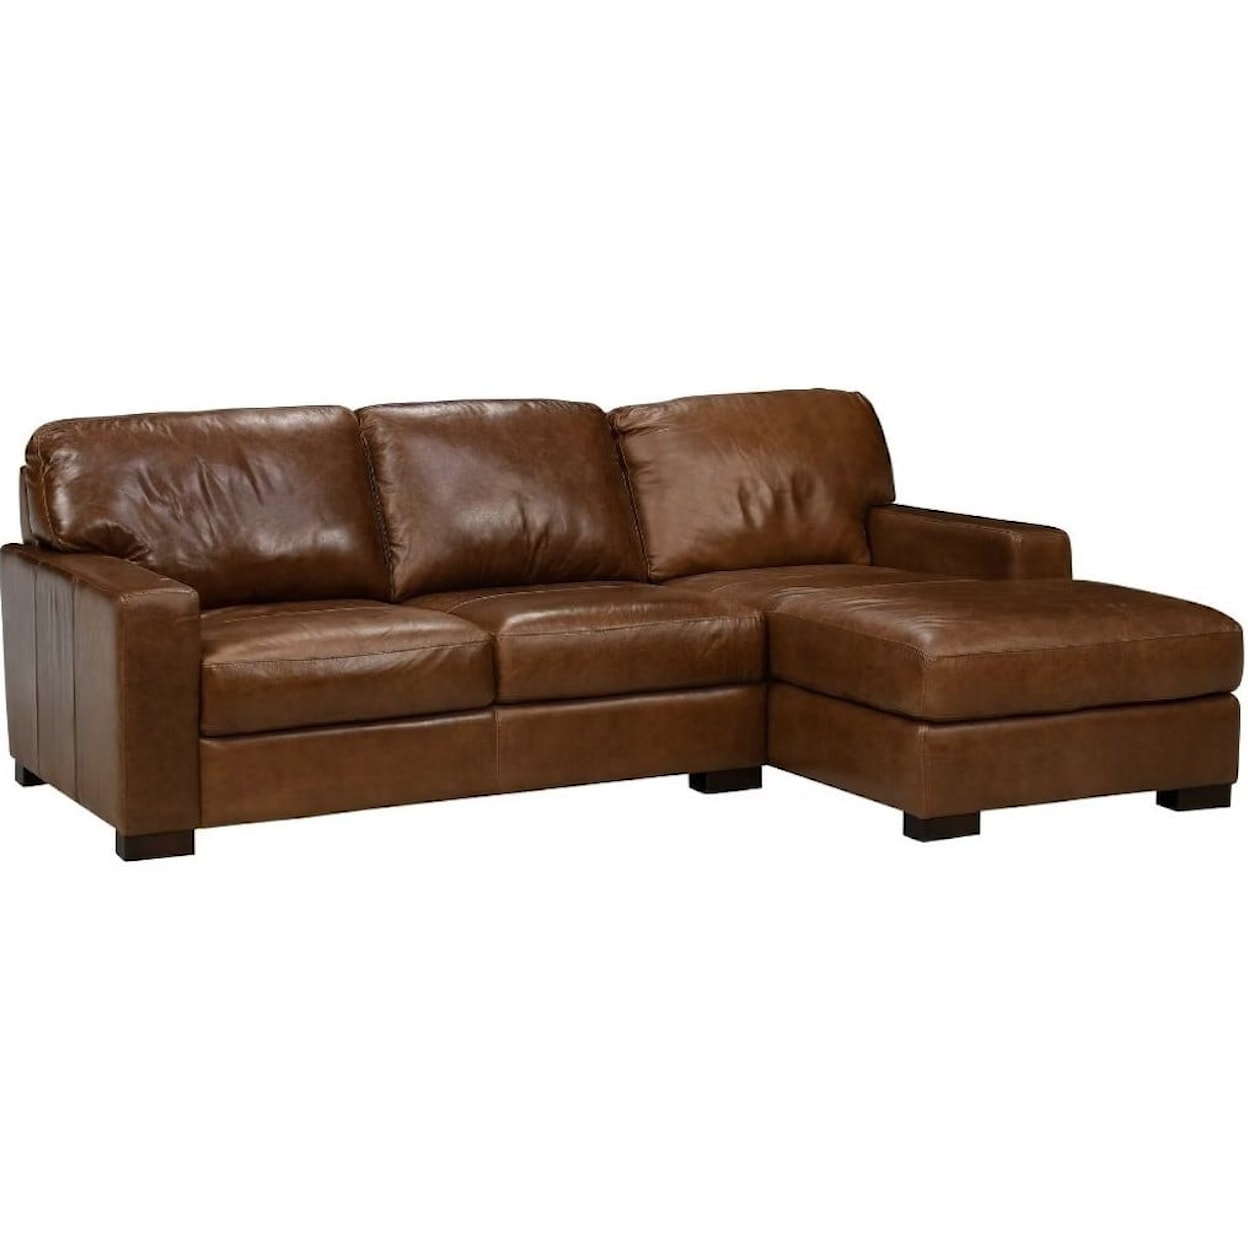 Virginia Furniture Market Premium Leather Florence Two Piece Sectional